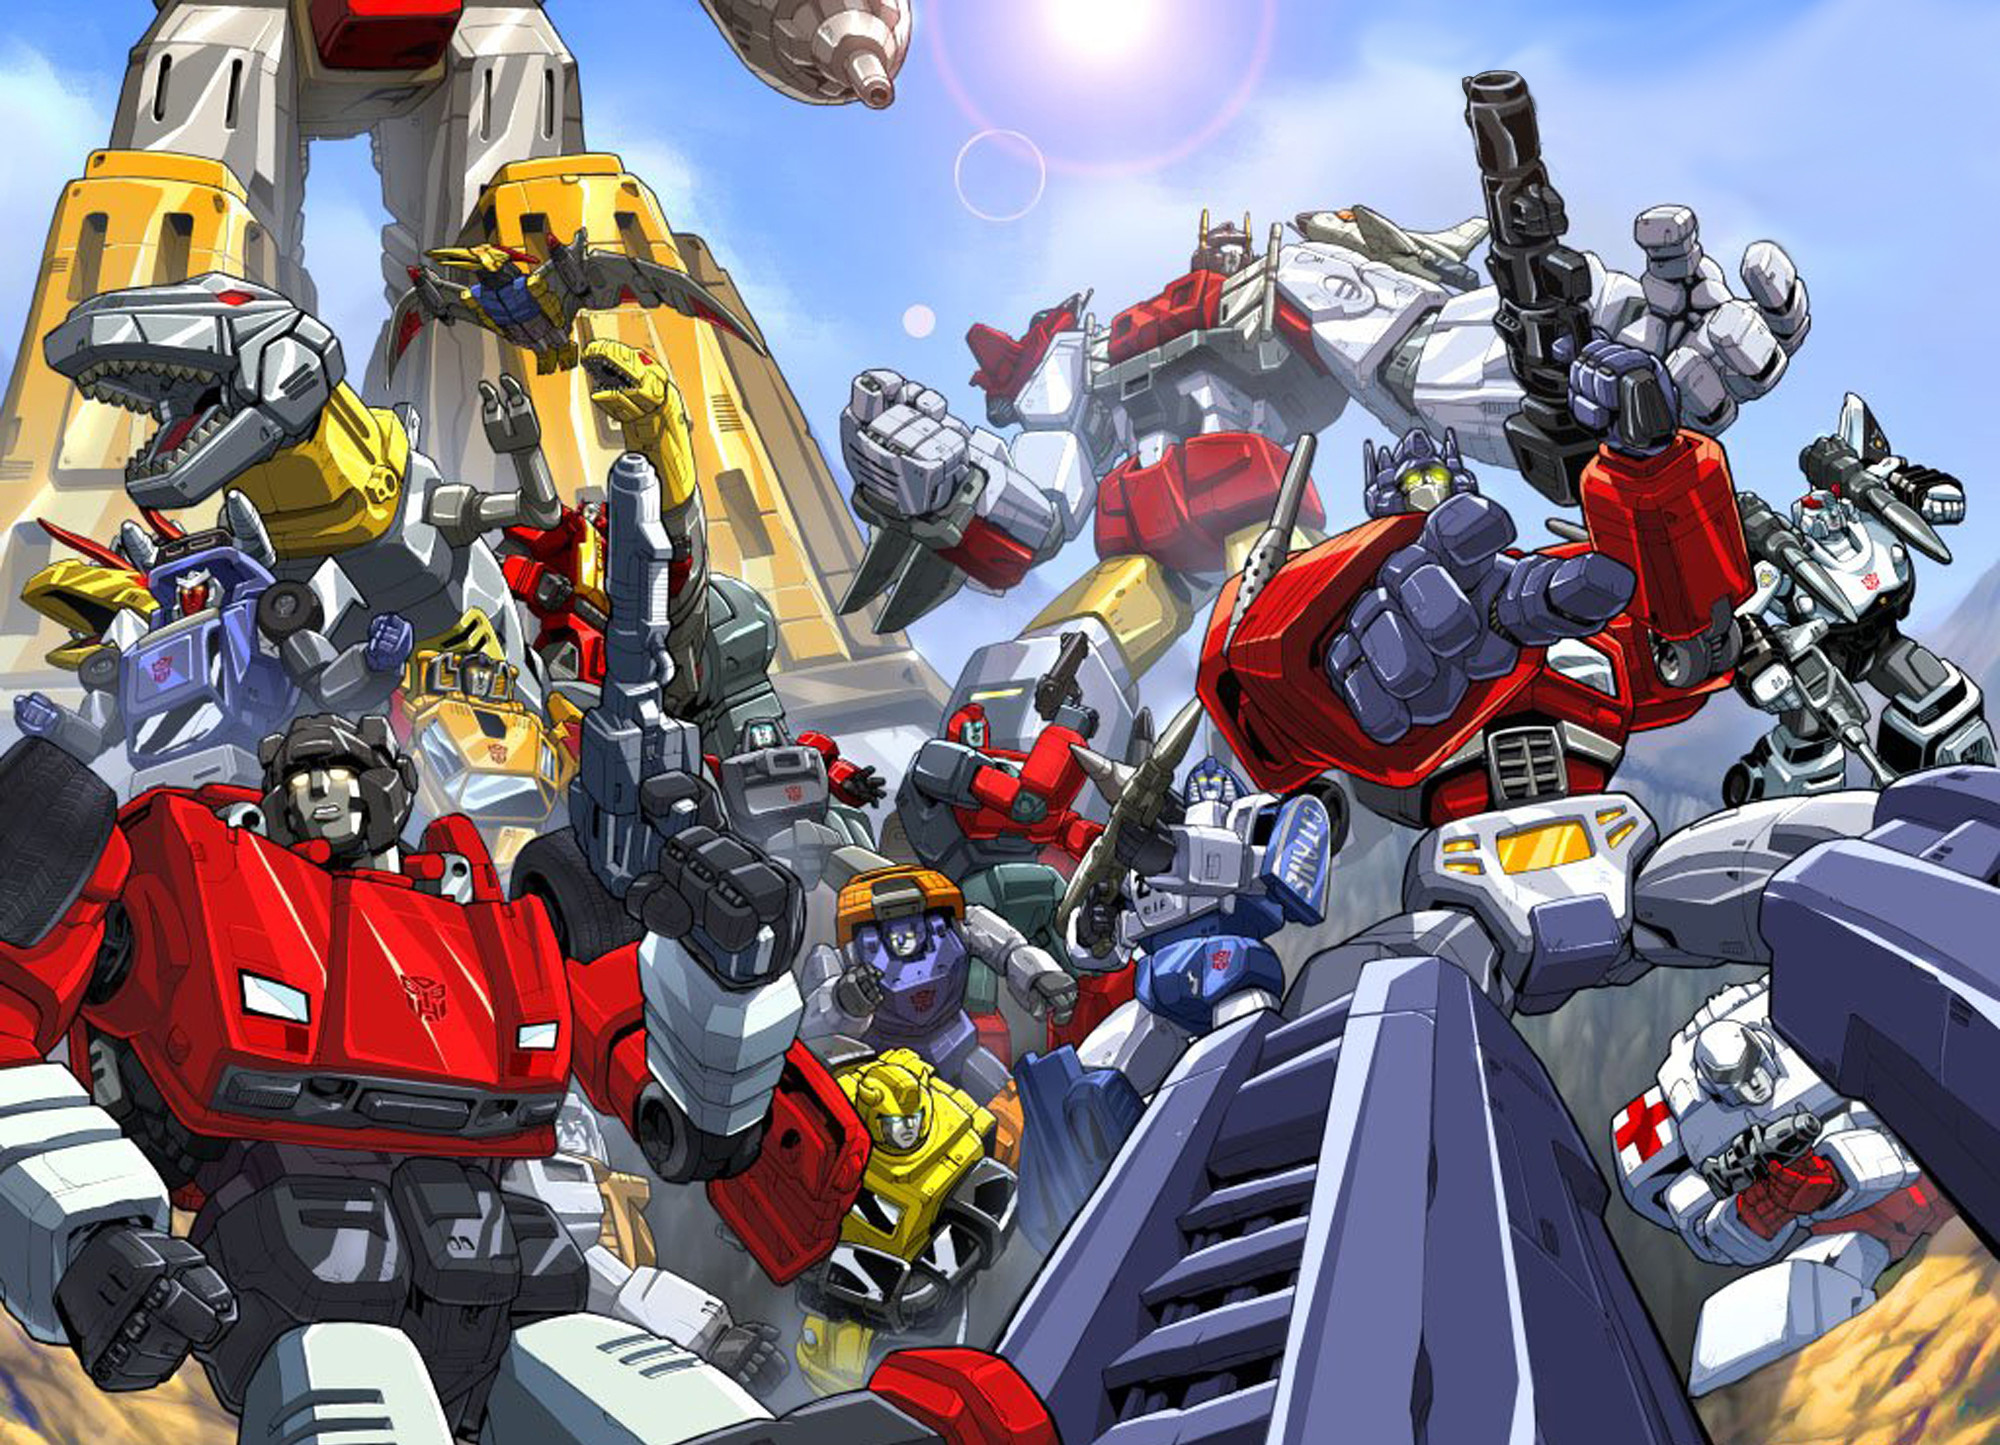 2000x1445 Transformers -Autobots by Pat Lee